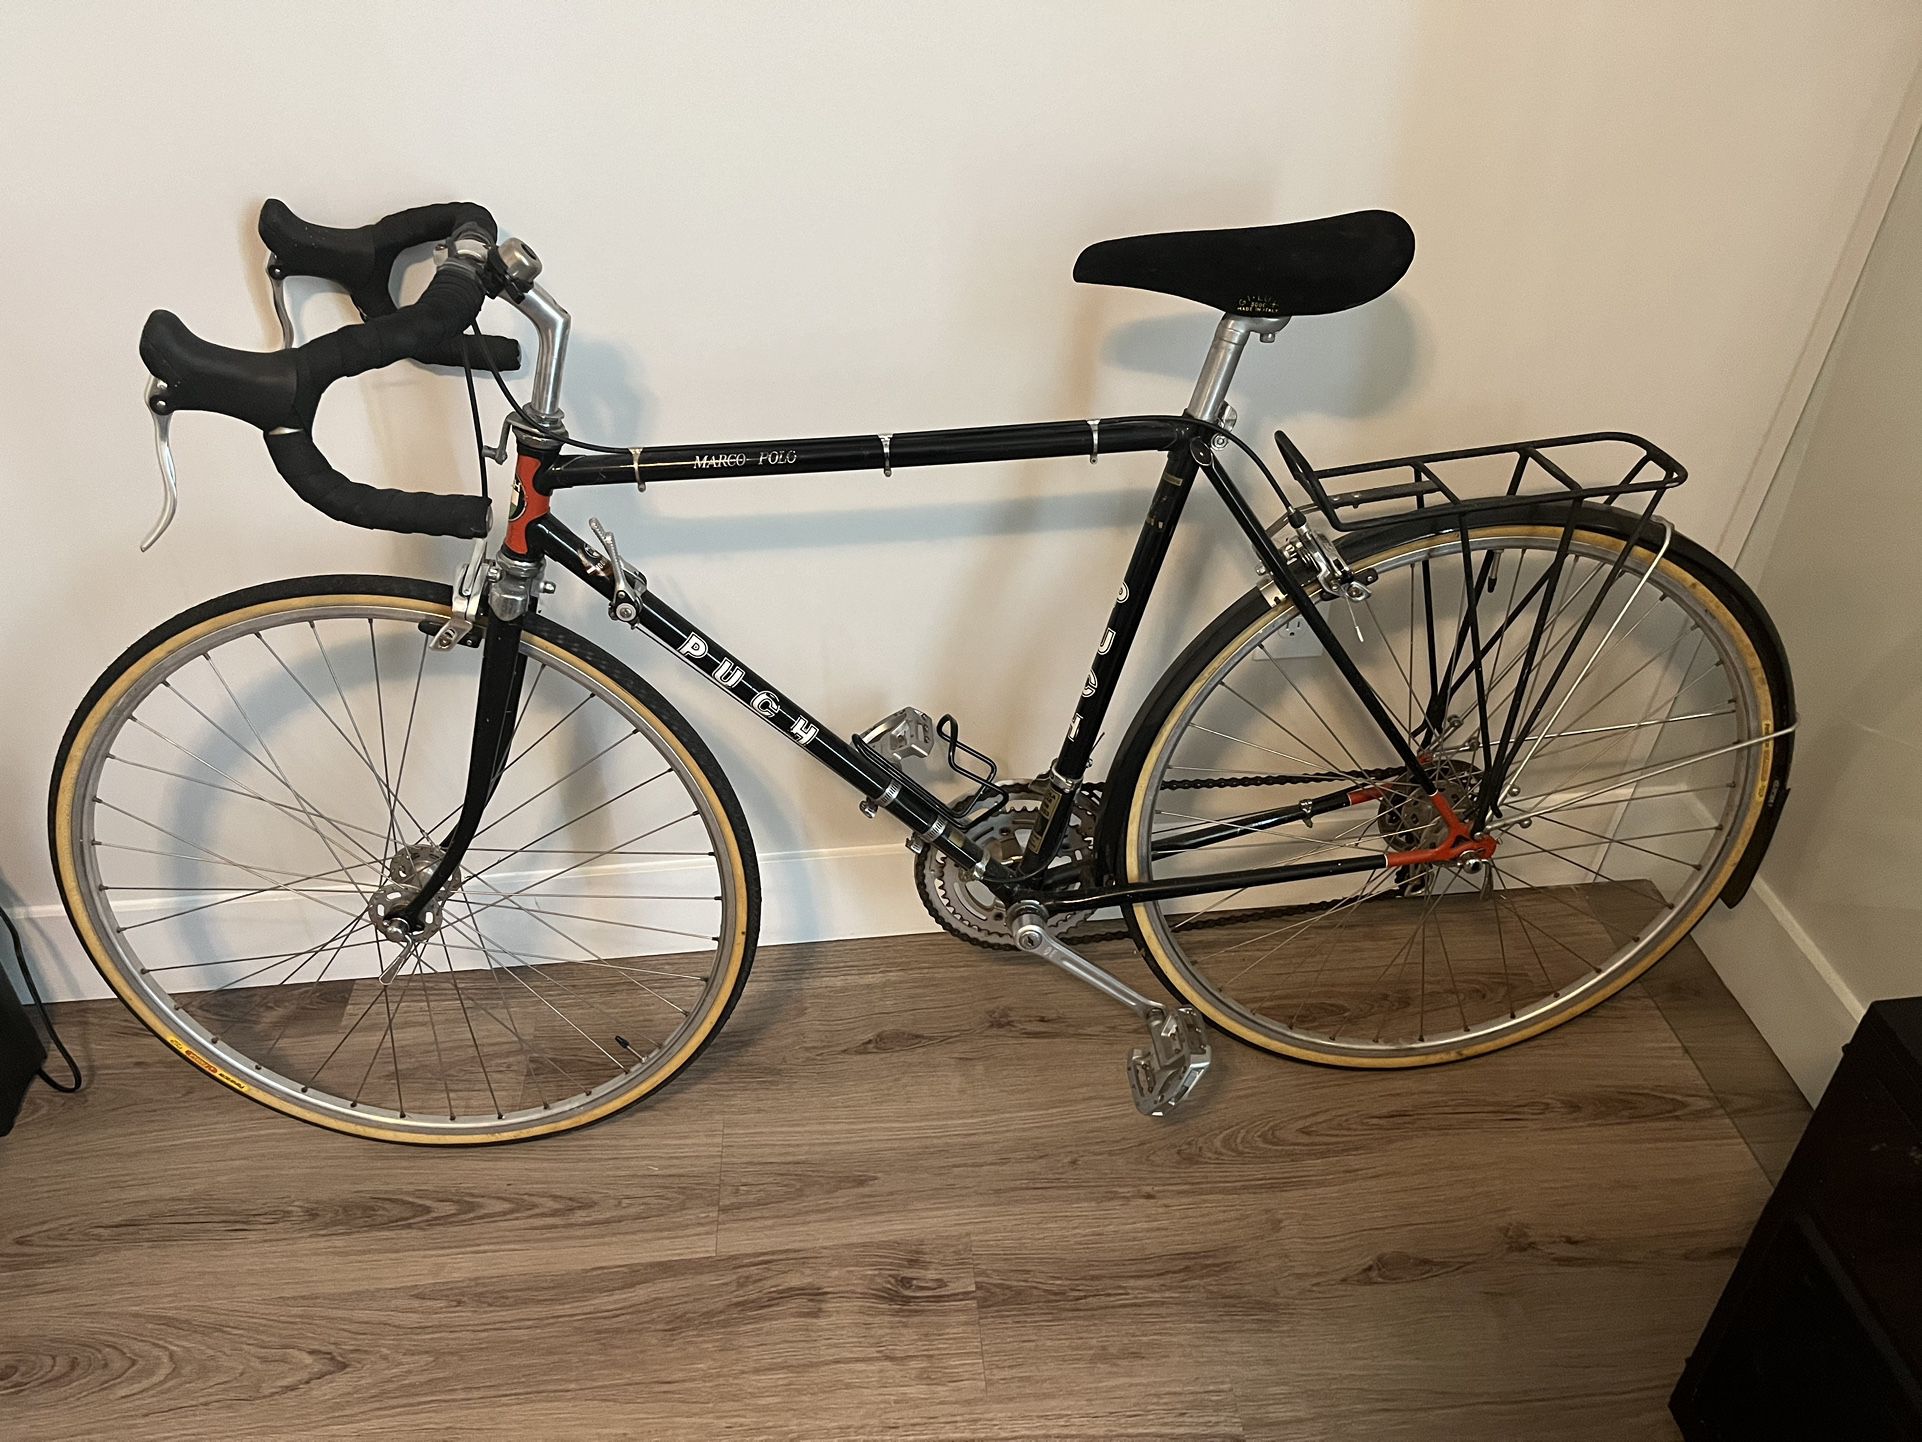 Late 1980s 23” Marco Polo Puch road bike bicycle